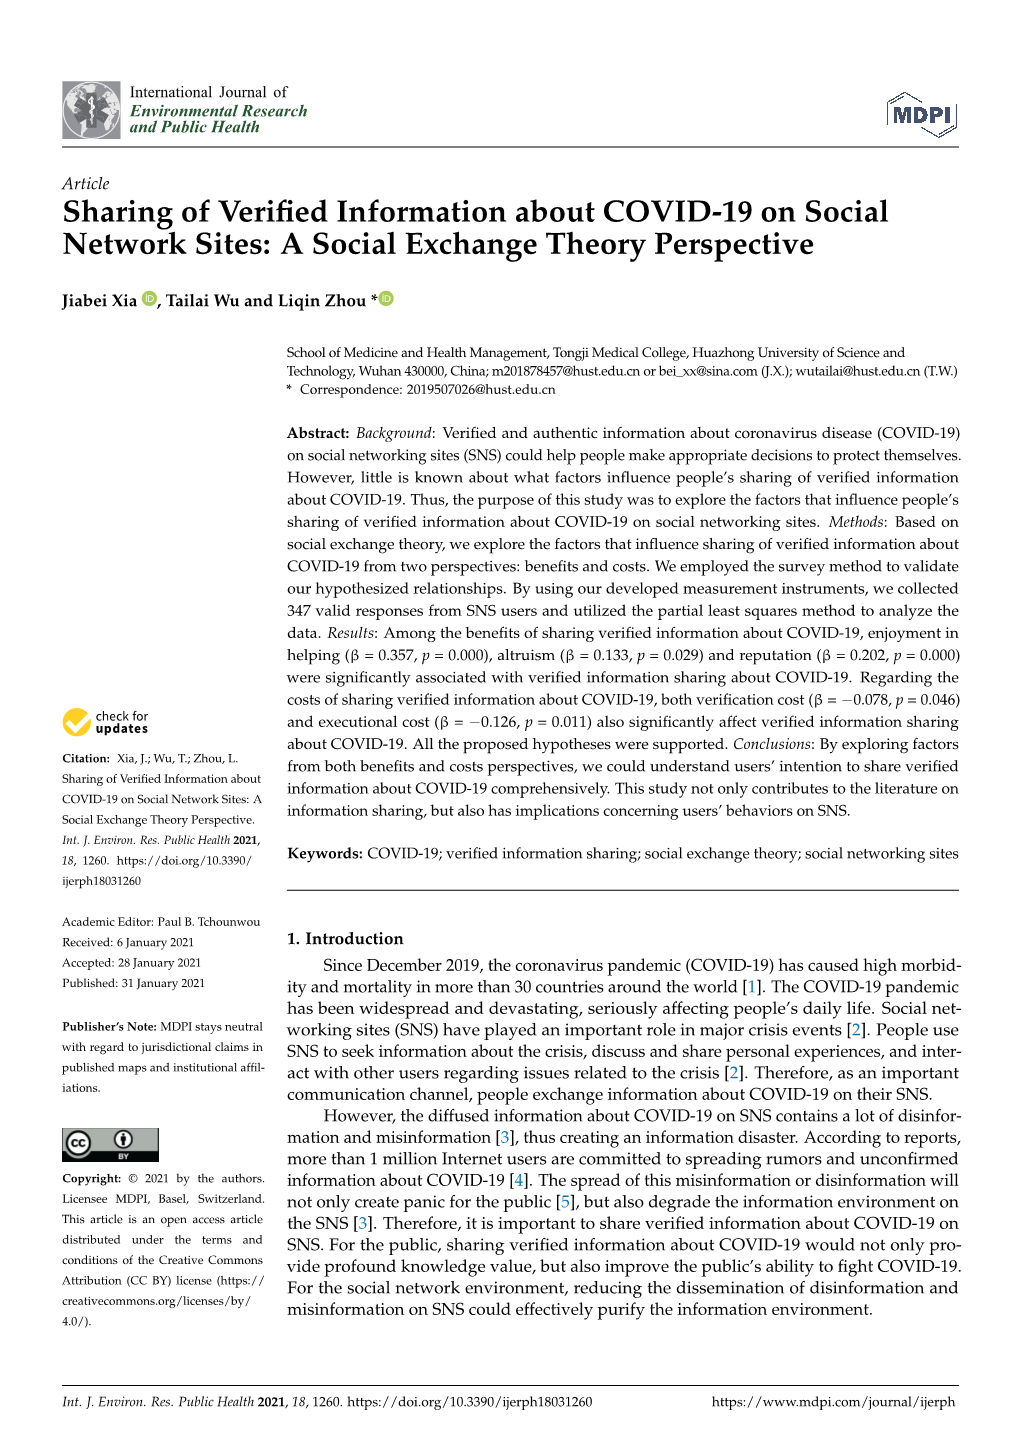 A Social Exchange Theory Perspective